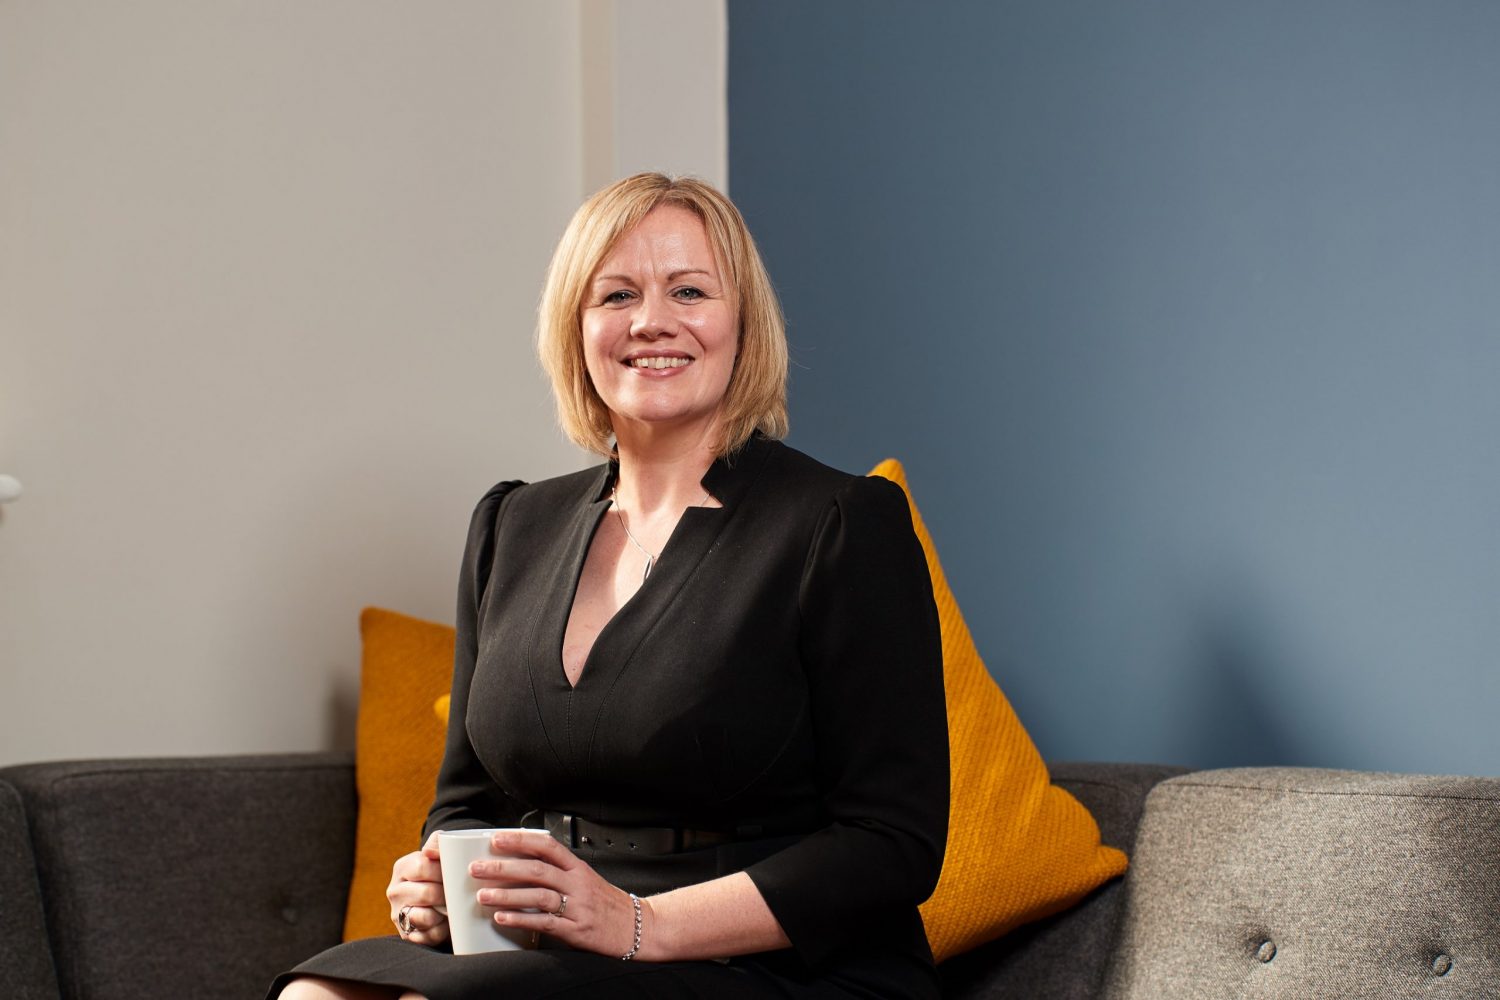 Joanne Whitfield, Fund Director at FW Capital sitting on a couch holding a mug